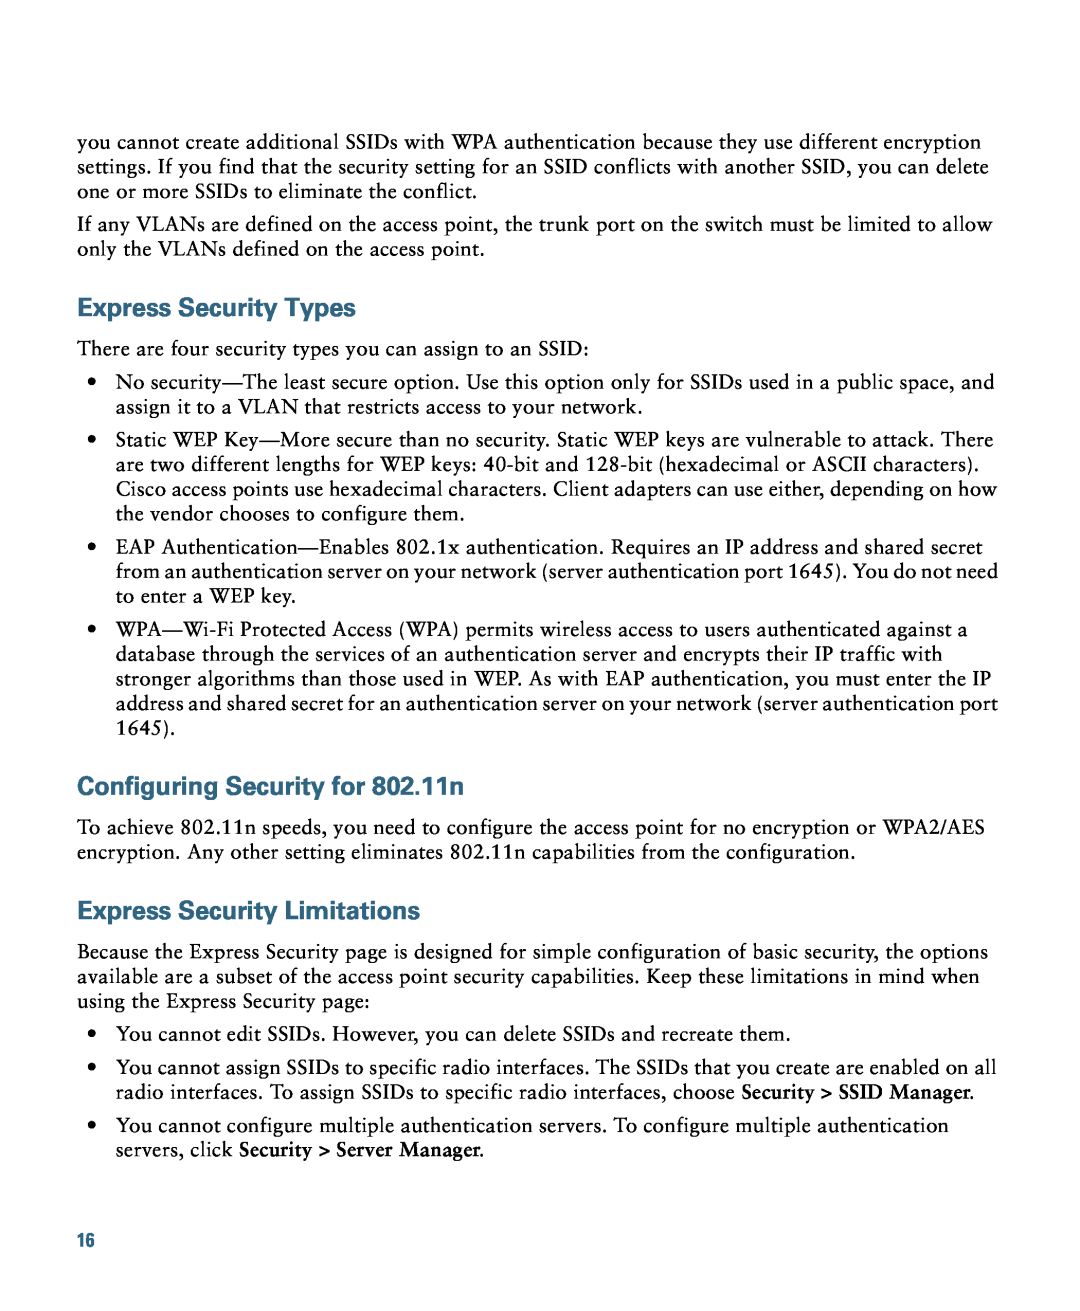 Cisco Systems 1140 specifications Express Security Types, Configuring Security for 802.11n, Express Security Limitations 